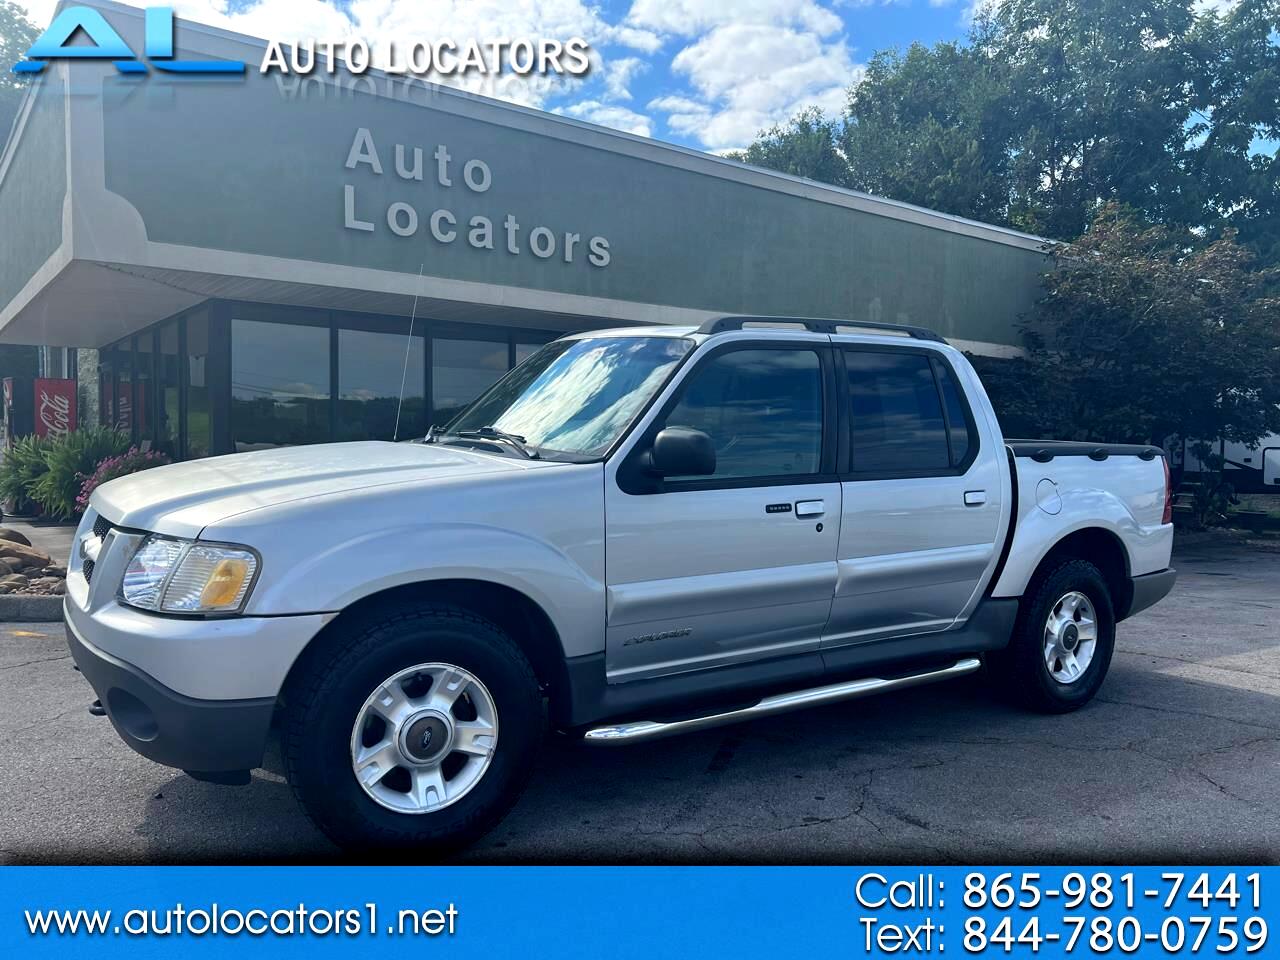 Ford Explorer Sport Trac 4dr 126" WB 4WD 2001